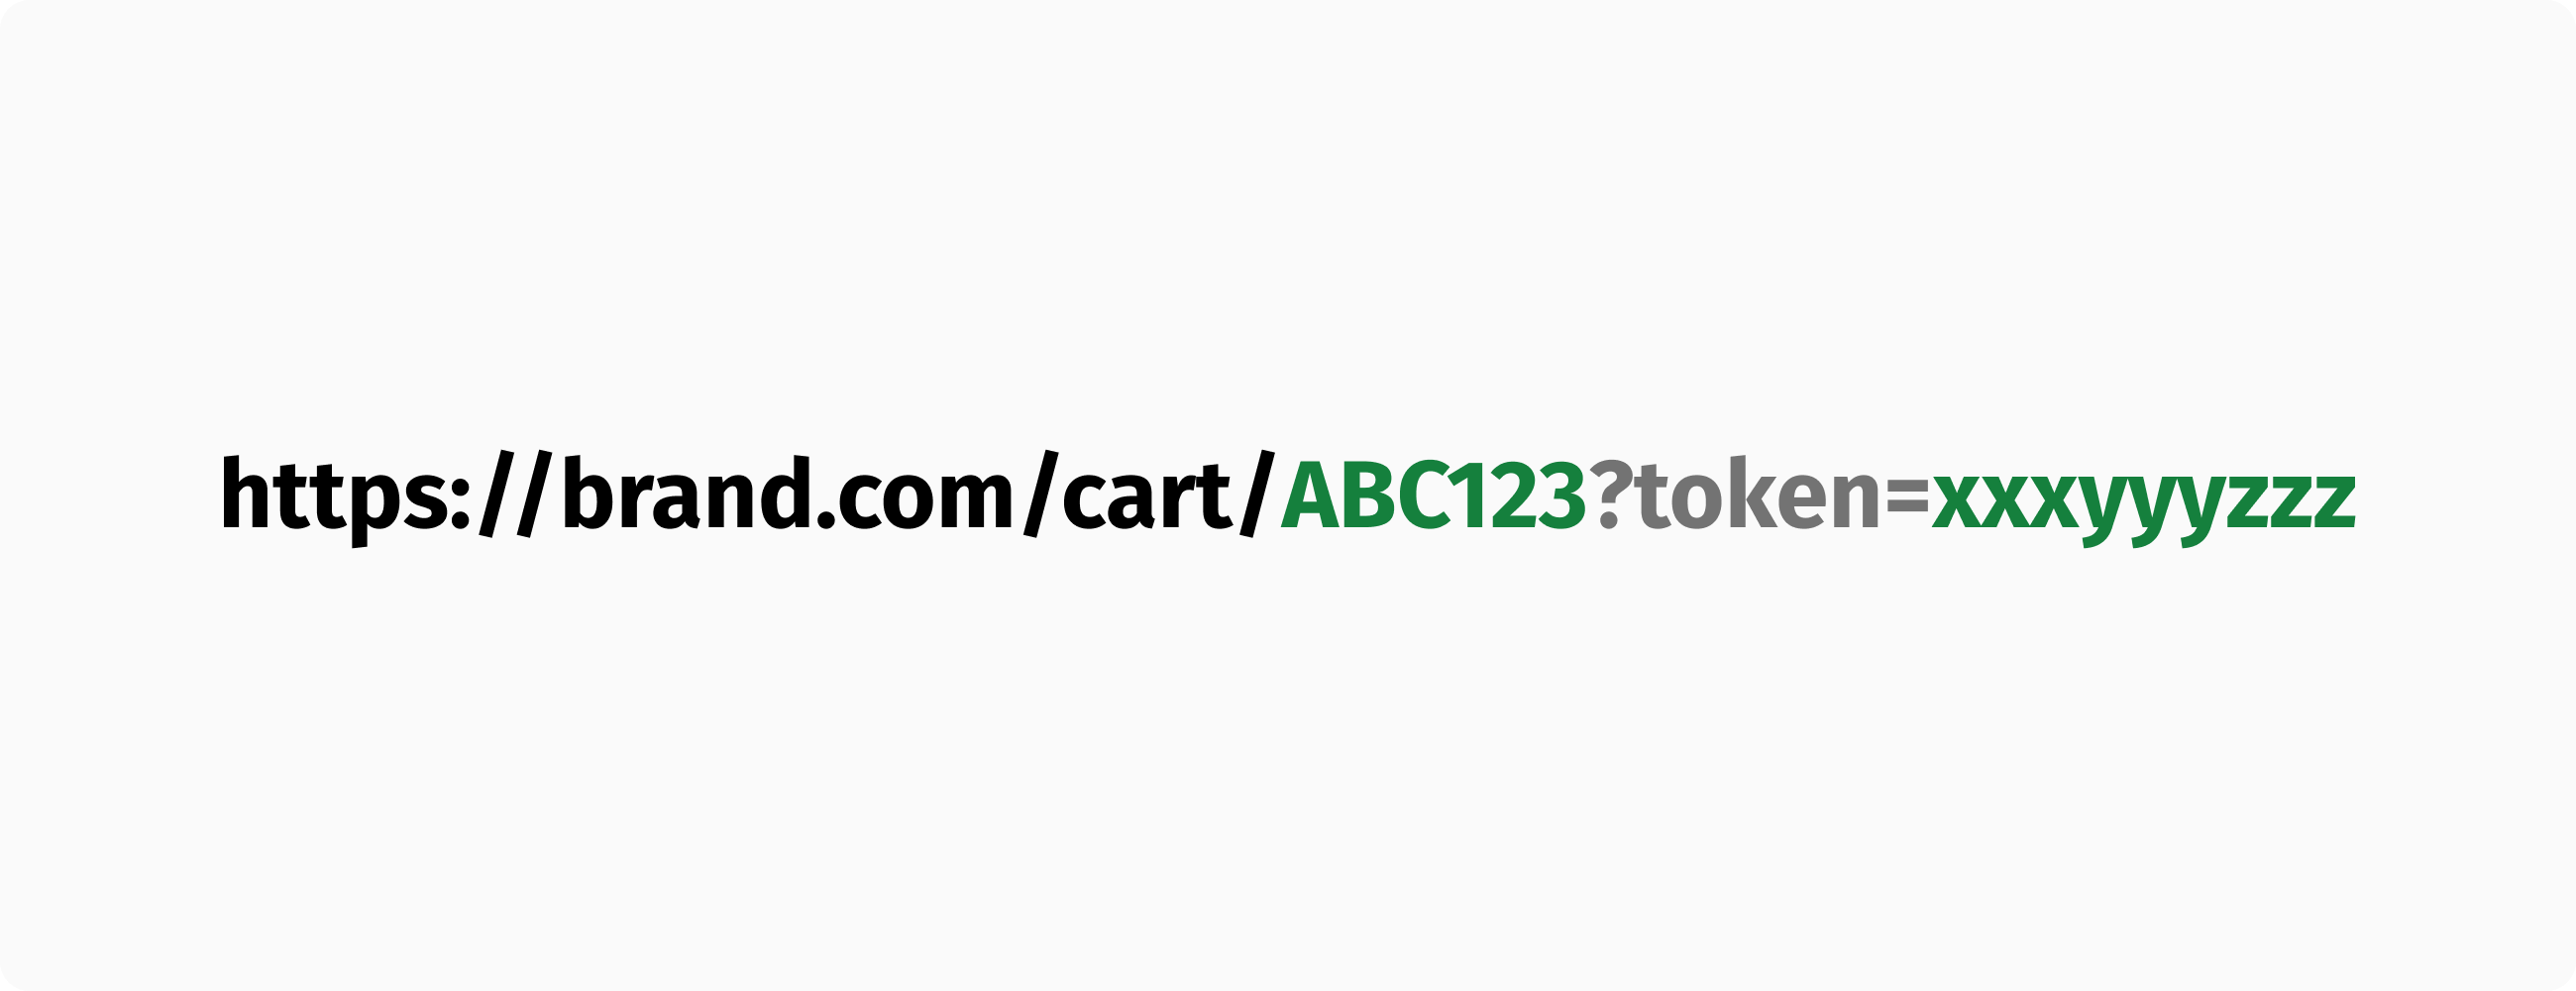 A stateless and secure cart URL.